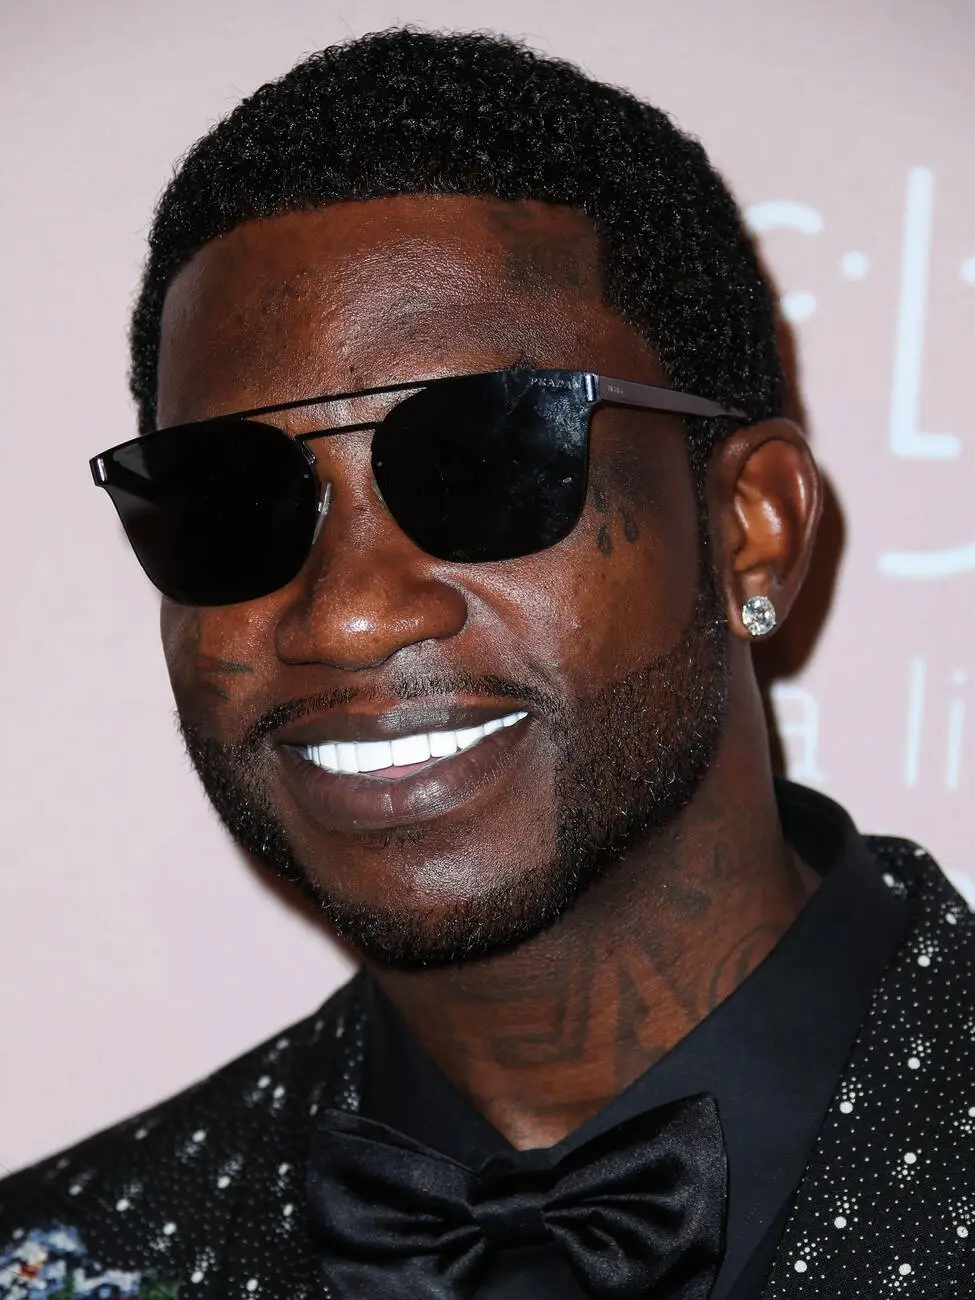 Gucci Mane tooth